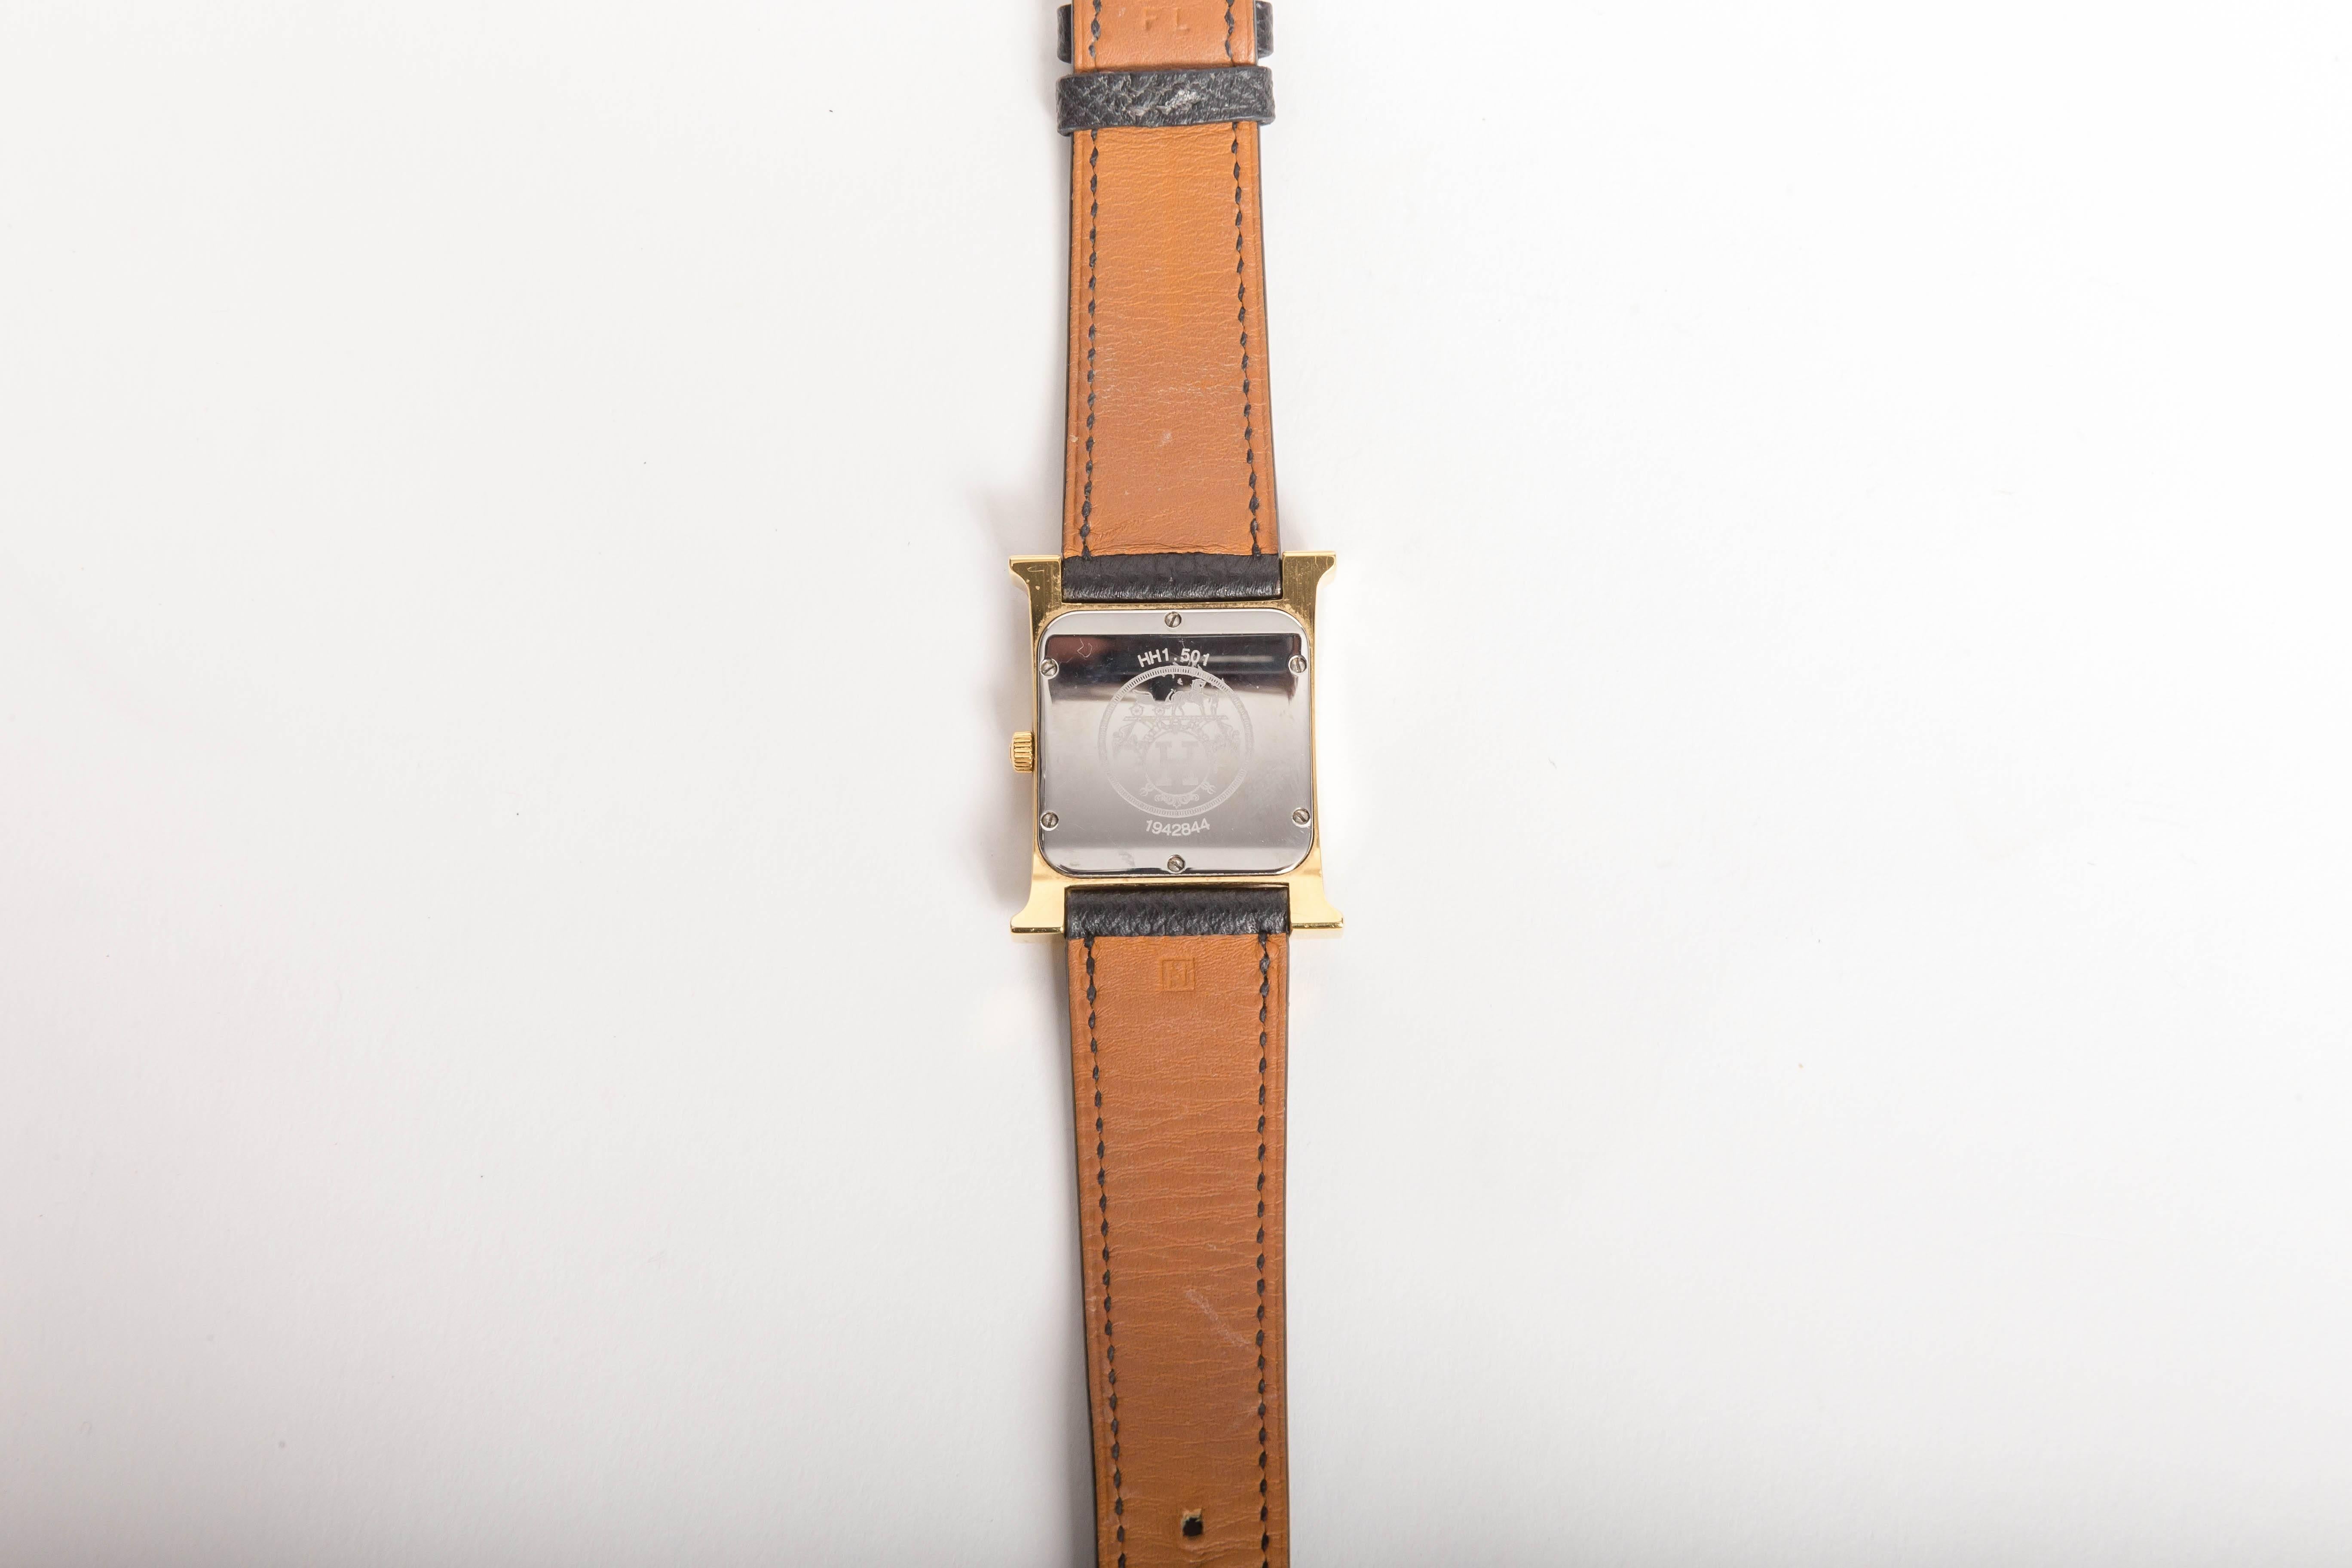 Hermes Heure H Watch in Goldtone Stainless Steel on a Grained Leather Strap 6